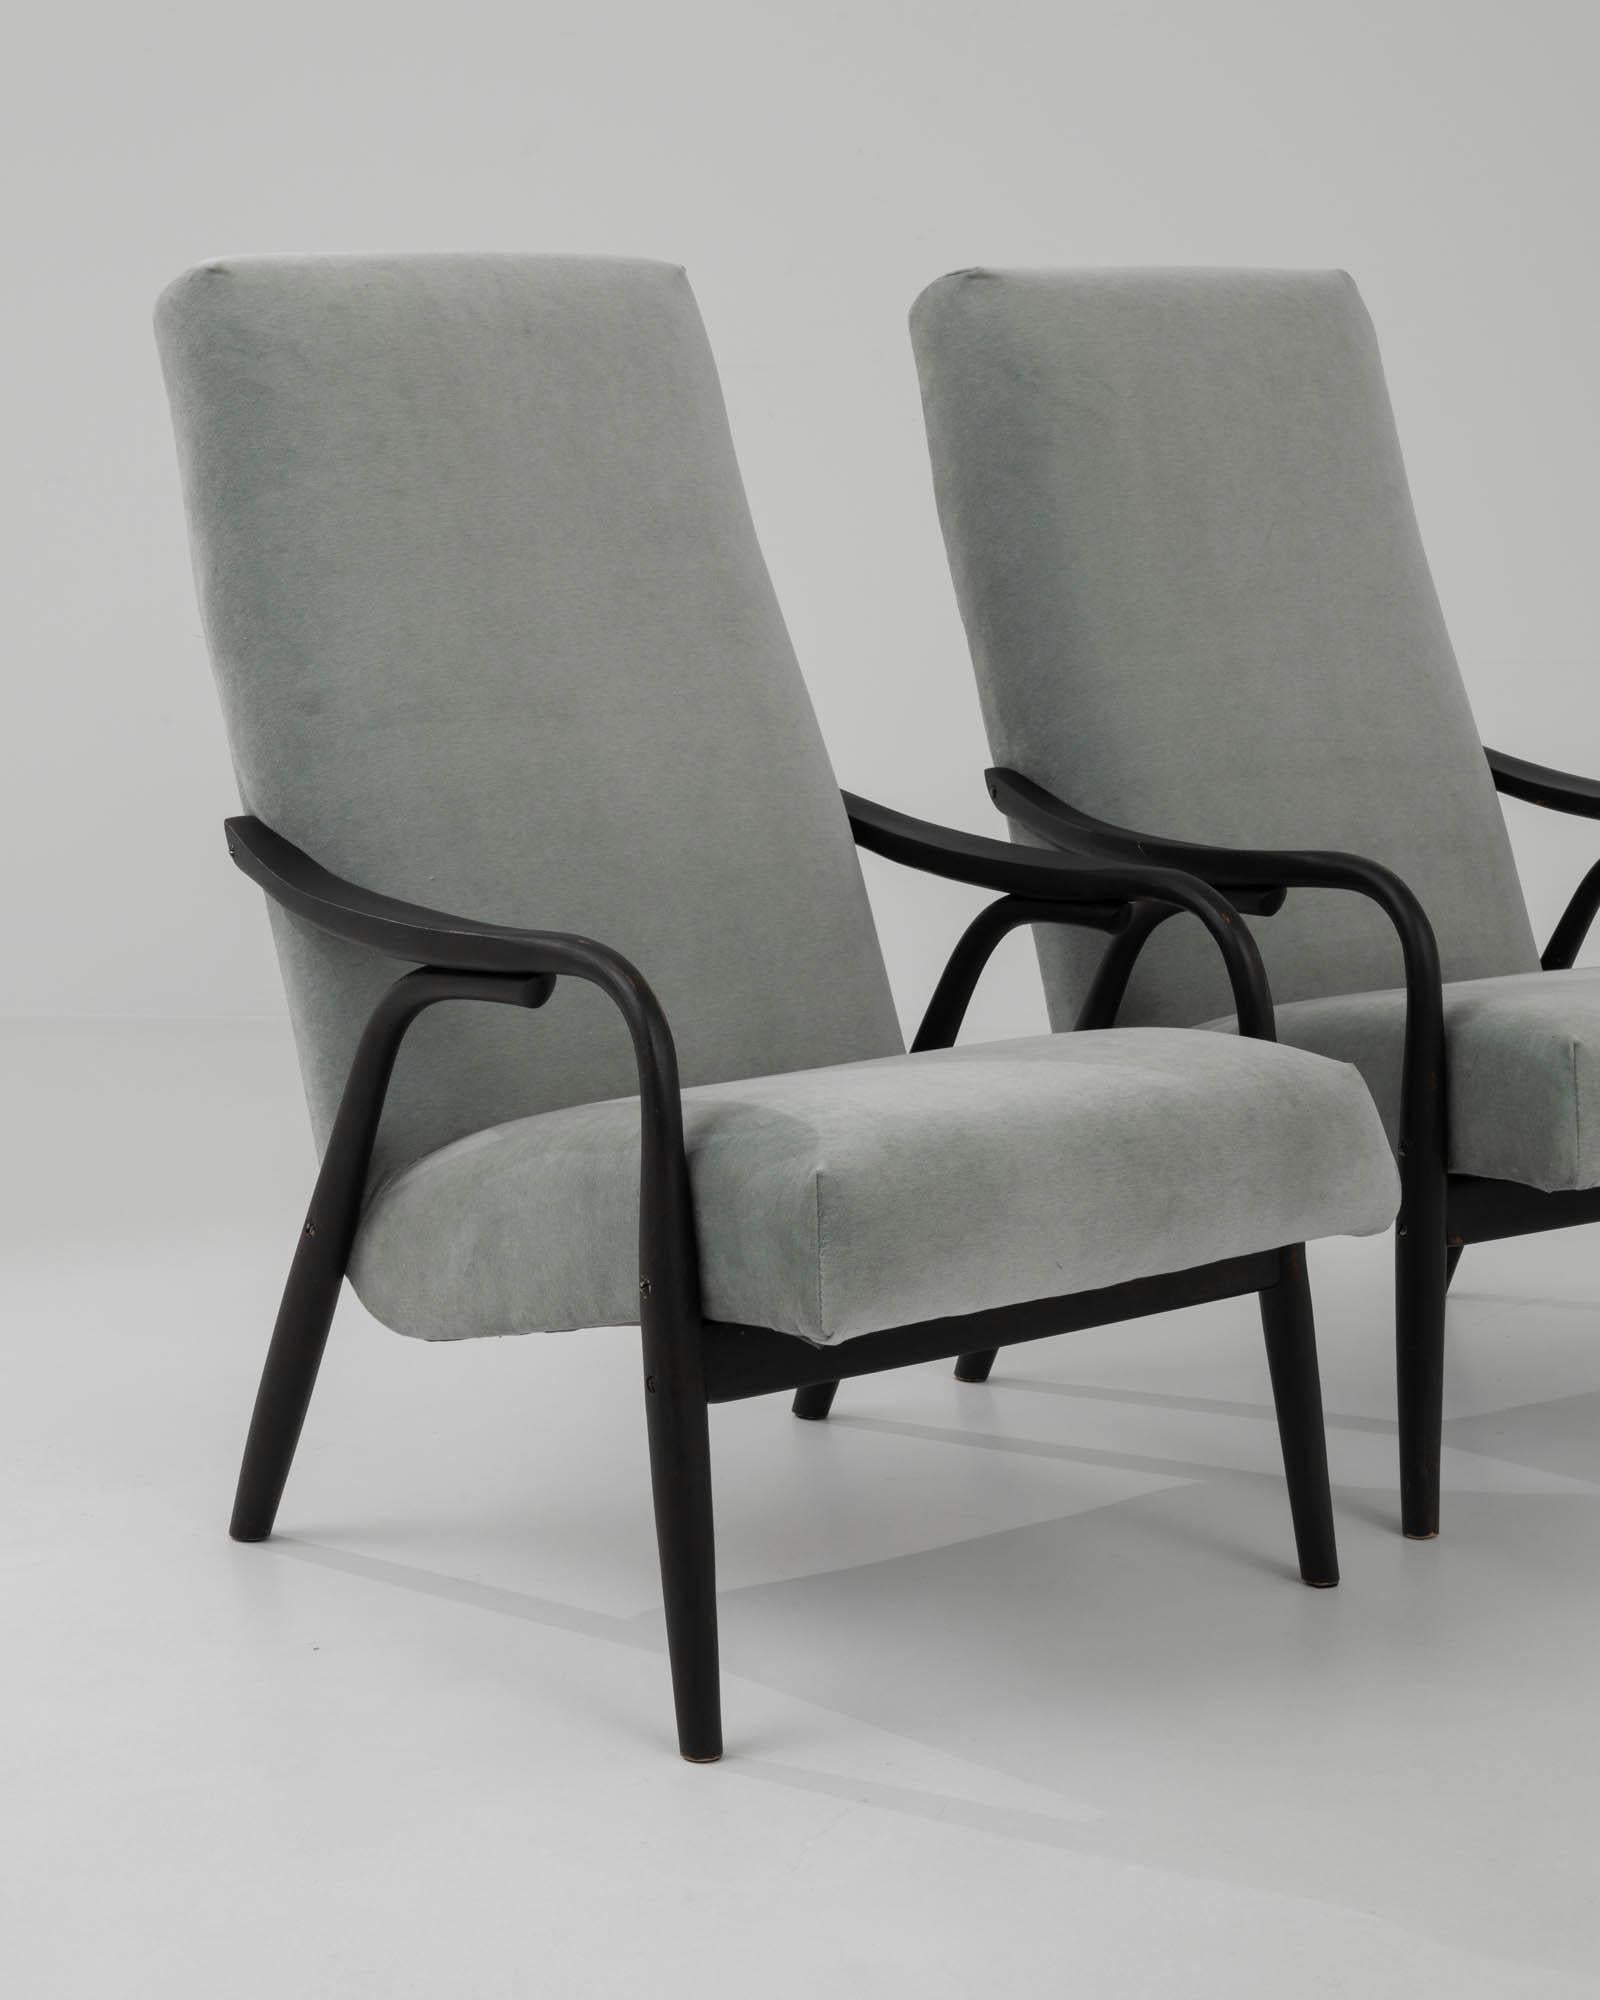 1960s Czech Upholstered Armchairs By Ton, a Pair For Sale 4